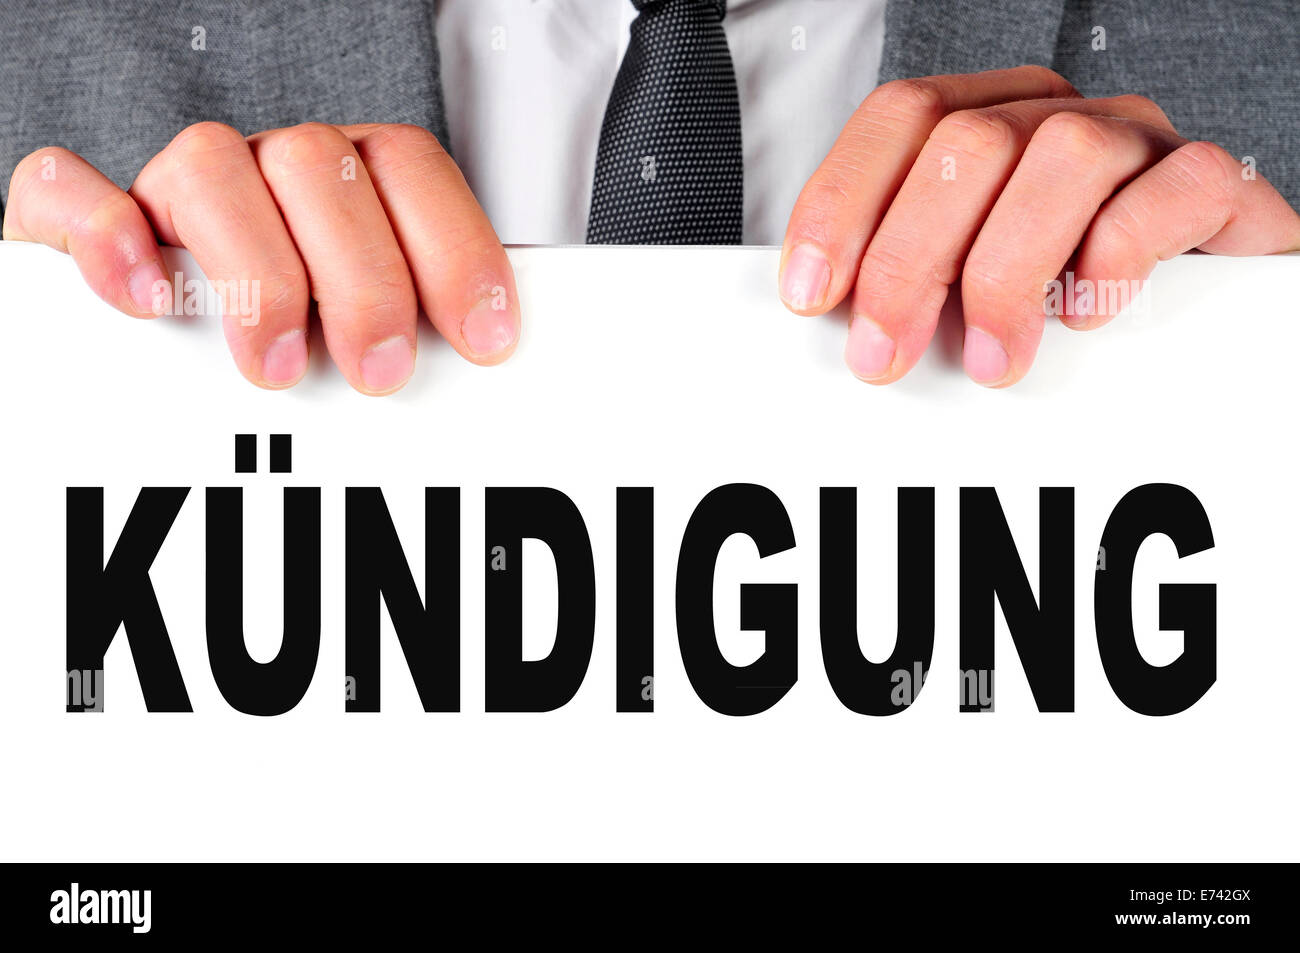 a businessman showing a signboard with the word kundigung, dismissal in german, written in it Stock Photo